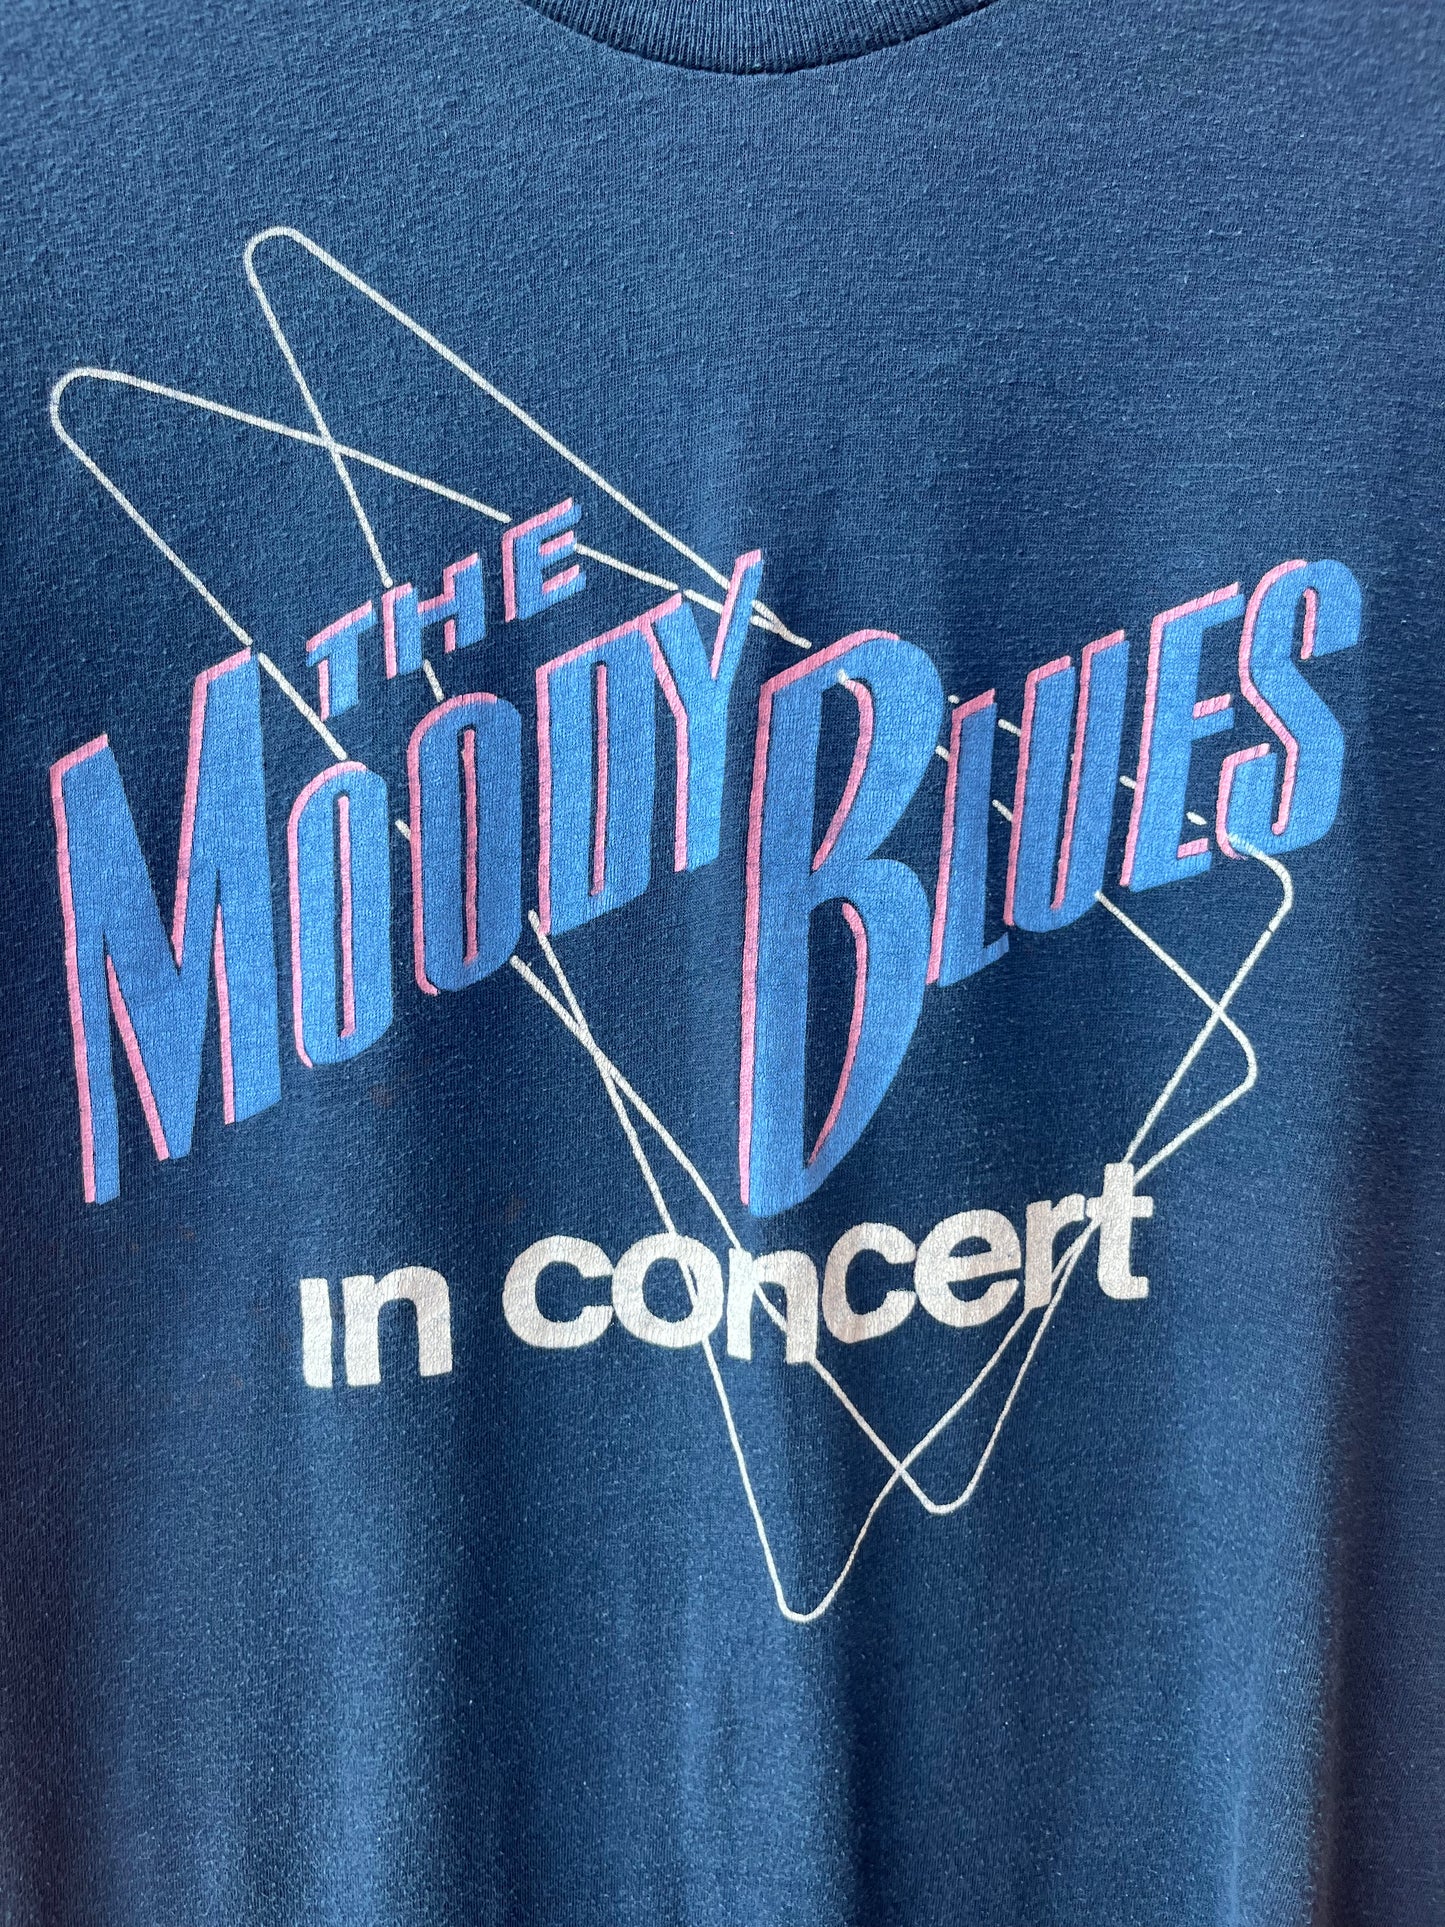 70’s Vintage The Moody Blues Concert Band Tee / Size S